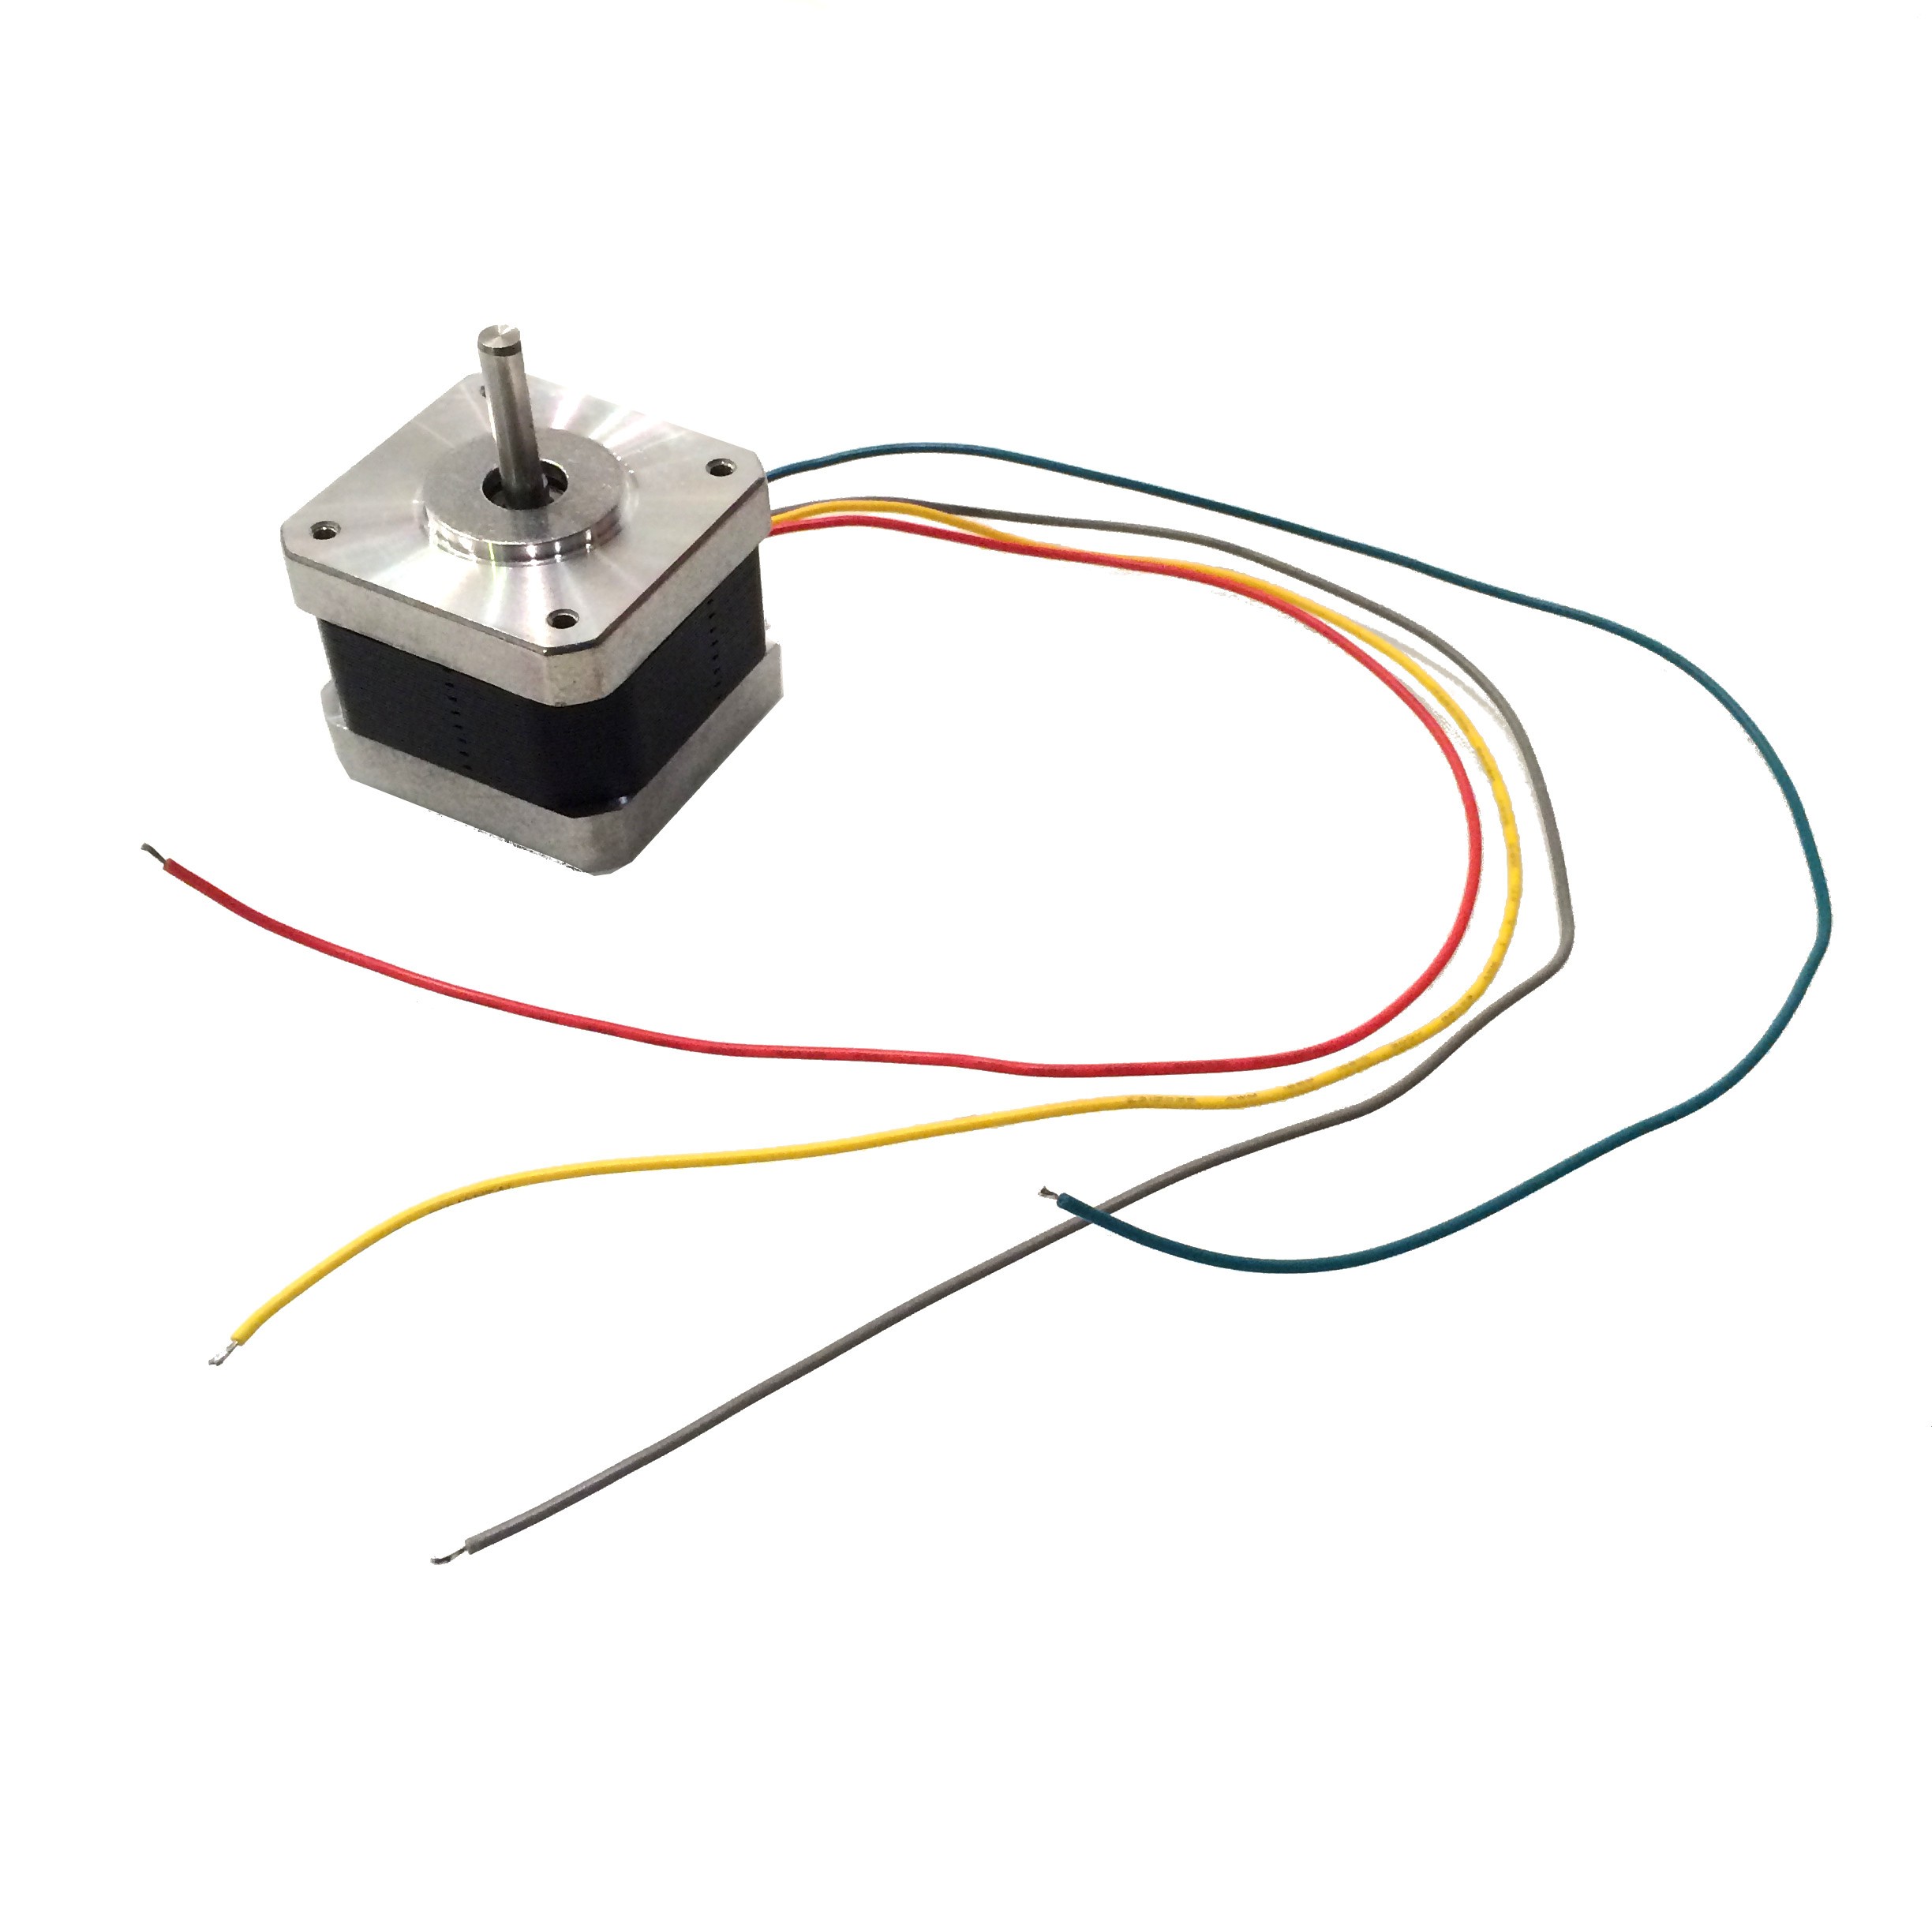 gazon Lot laag $18.99 - NEMA 17 Stepper Motor with Detachable Wires: 4.8V - Tinkersphere